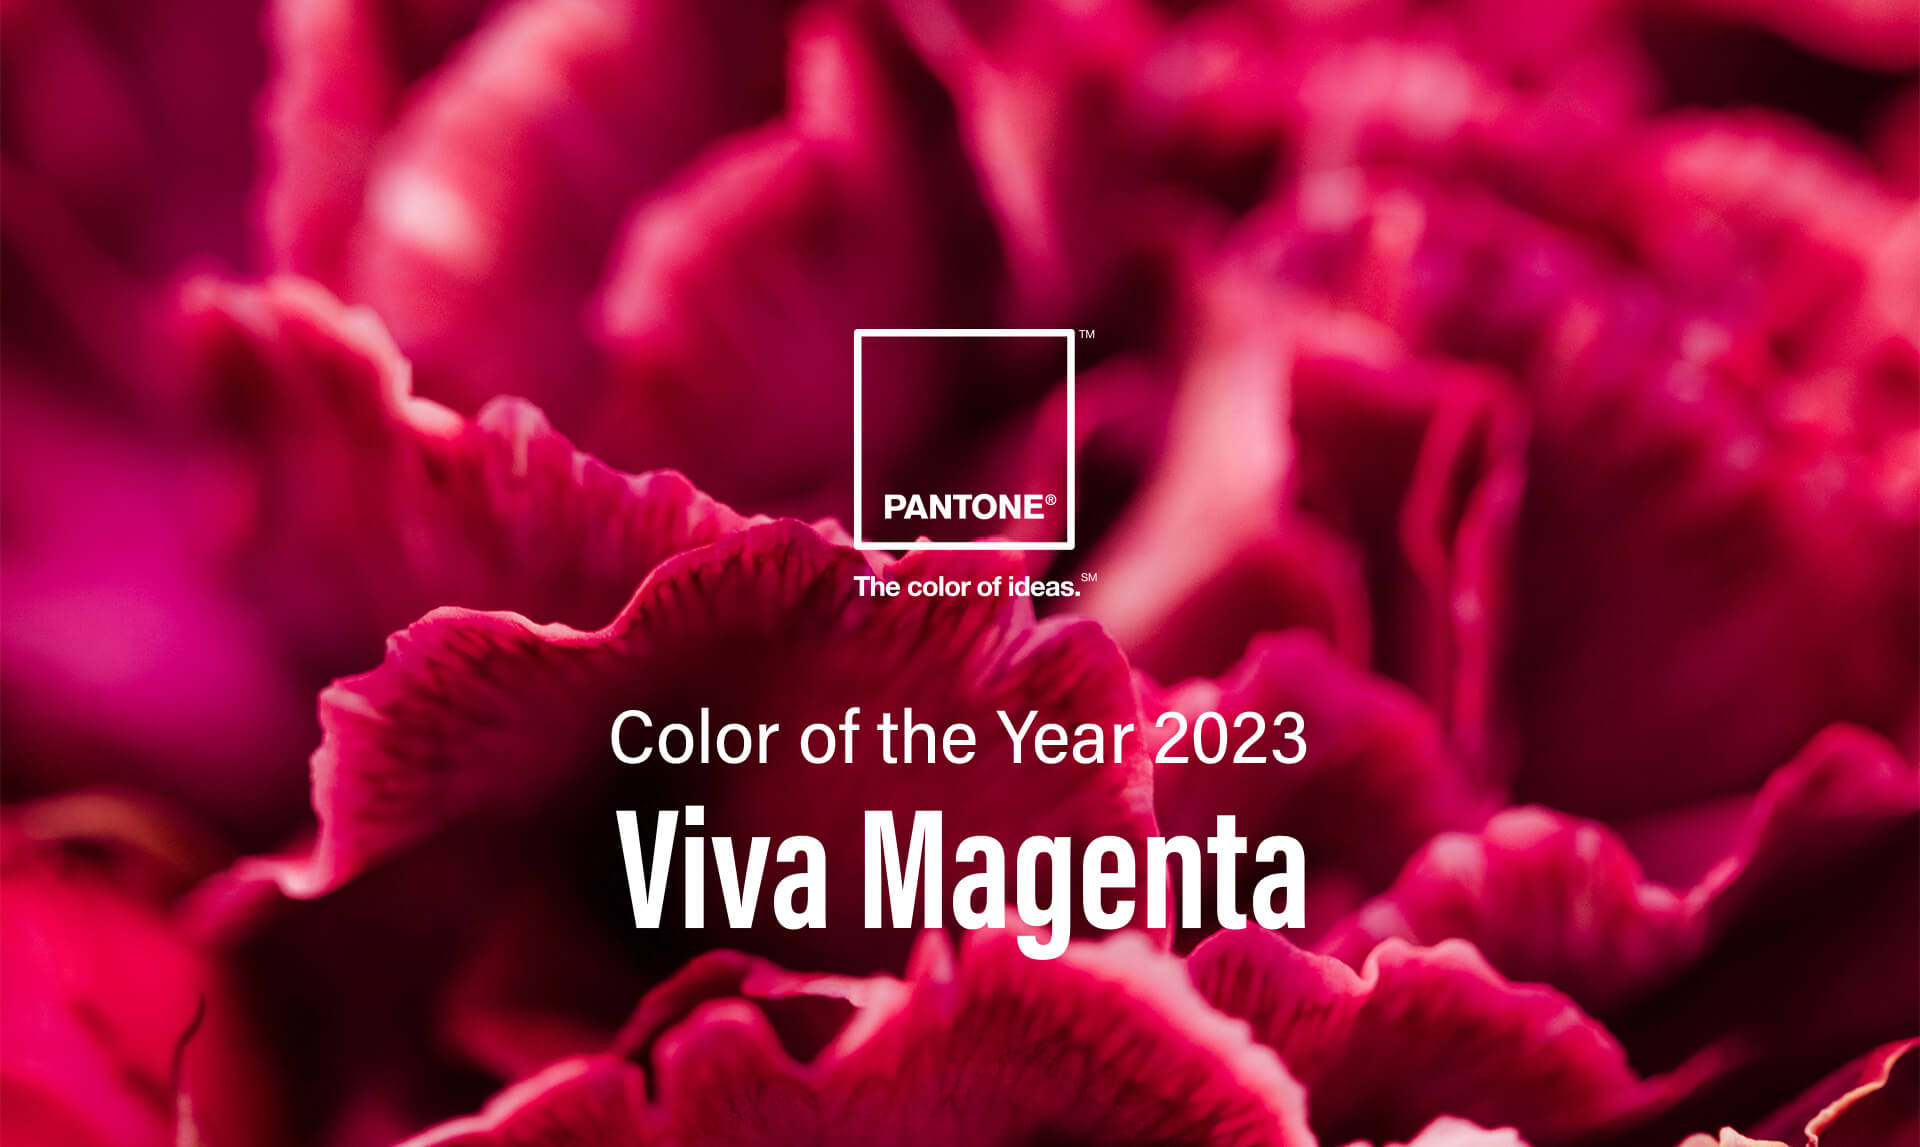 COLOR OF THE YEAR 2023 Viva Magenta